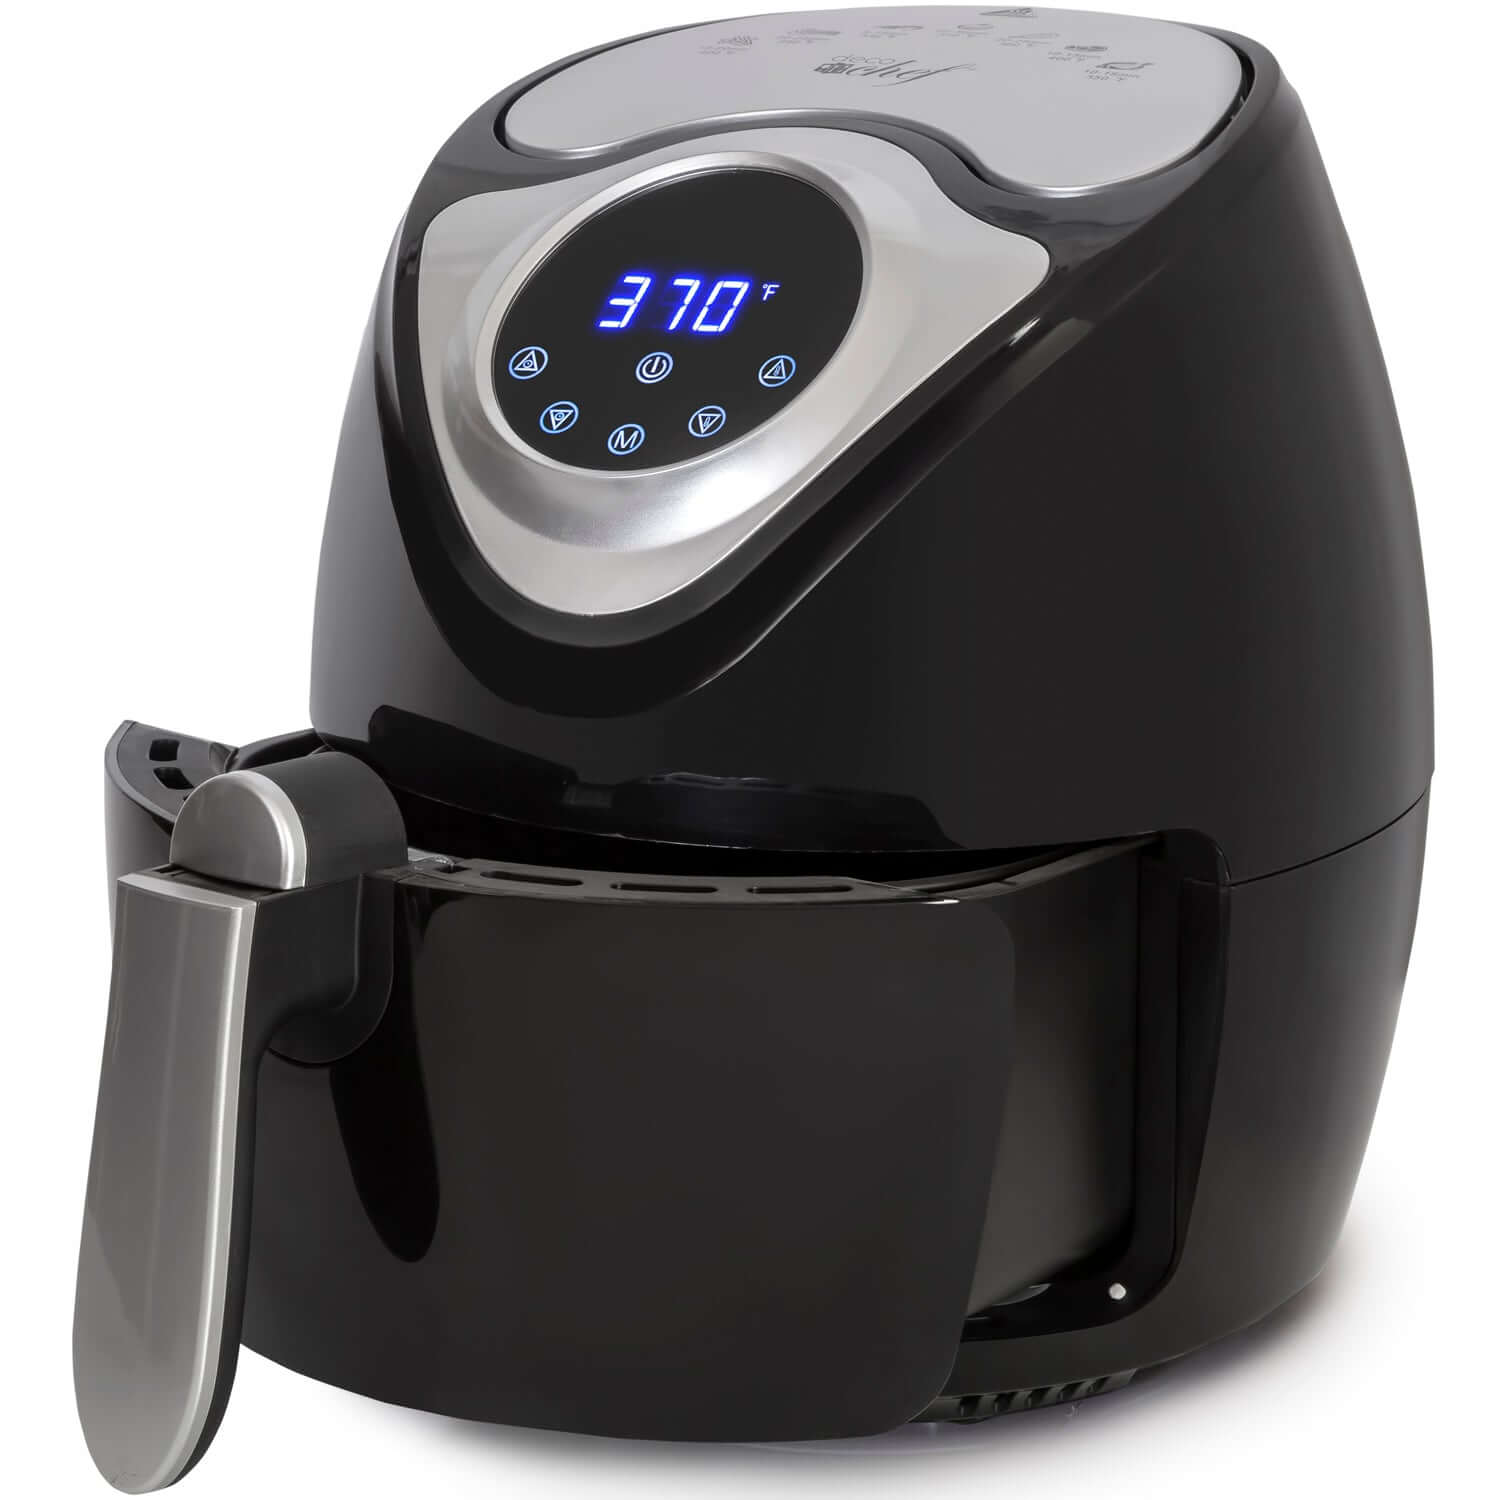 The Deco Journal - Air Fryer MultiTouch Easyways